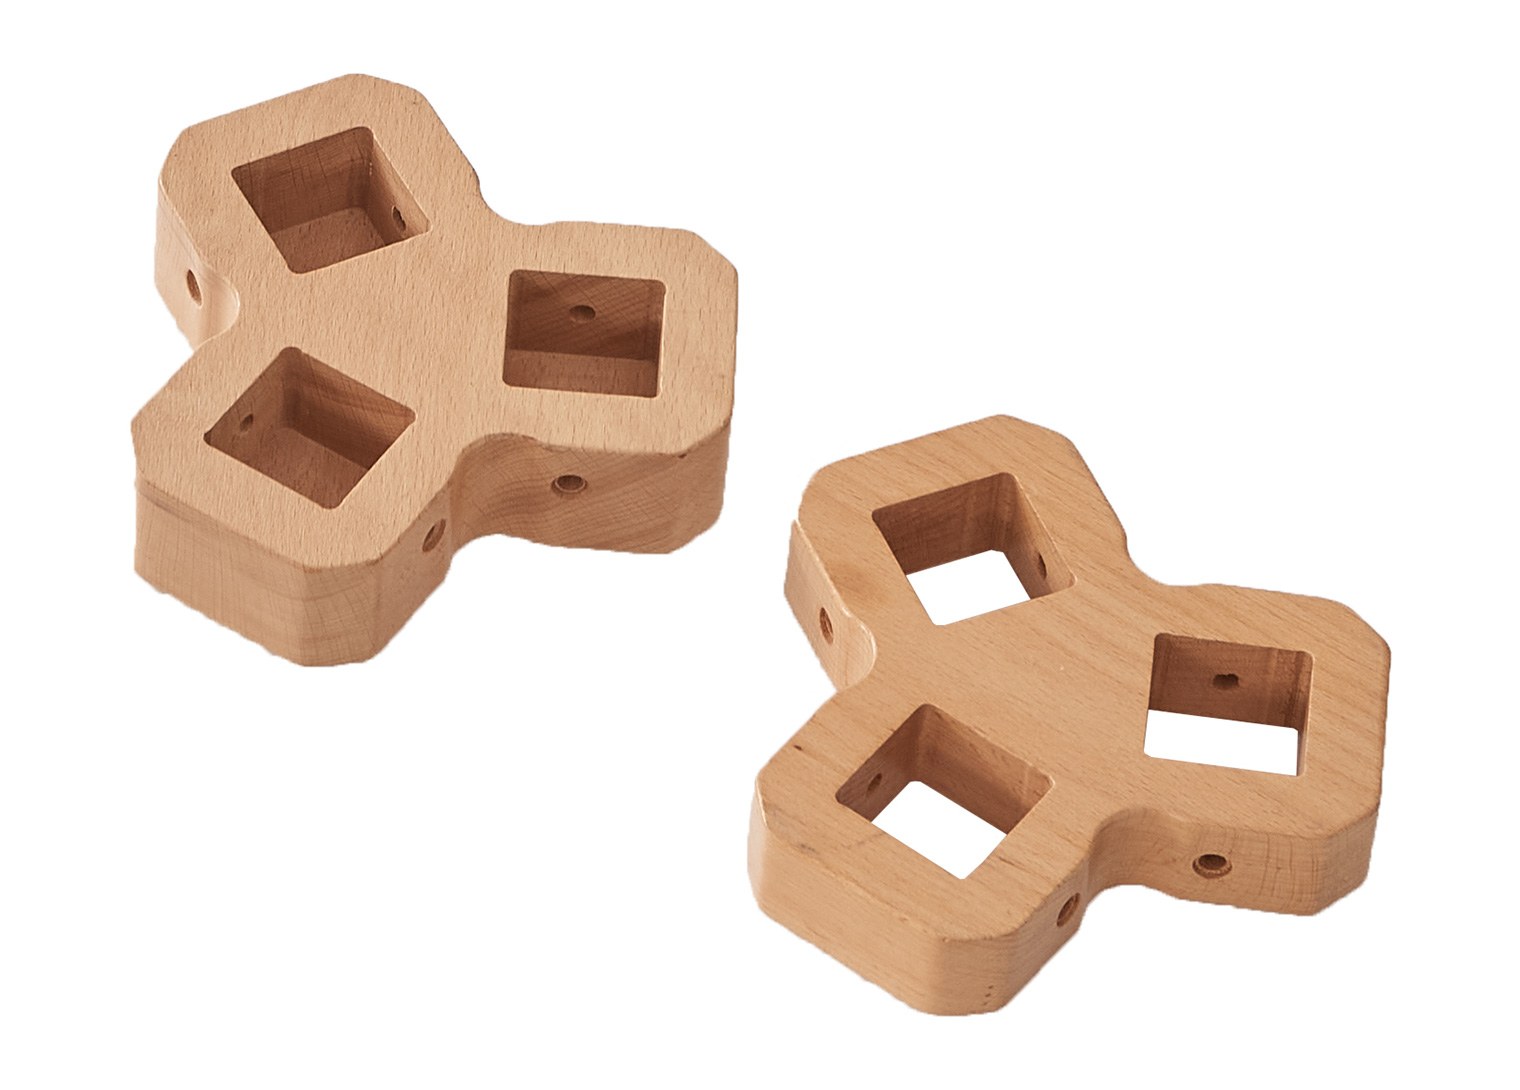 Type III Connector 2-Piece Set - 3 Panels of Equal Heights at 120° Inner Angles